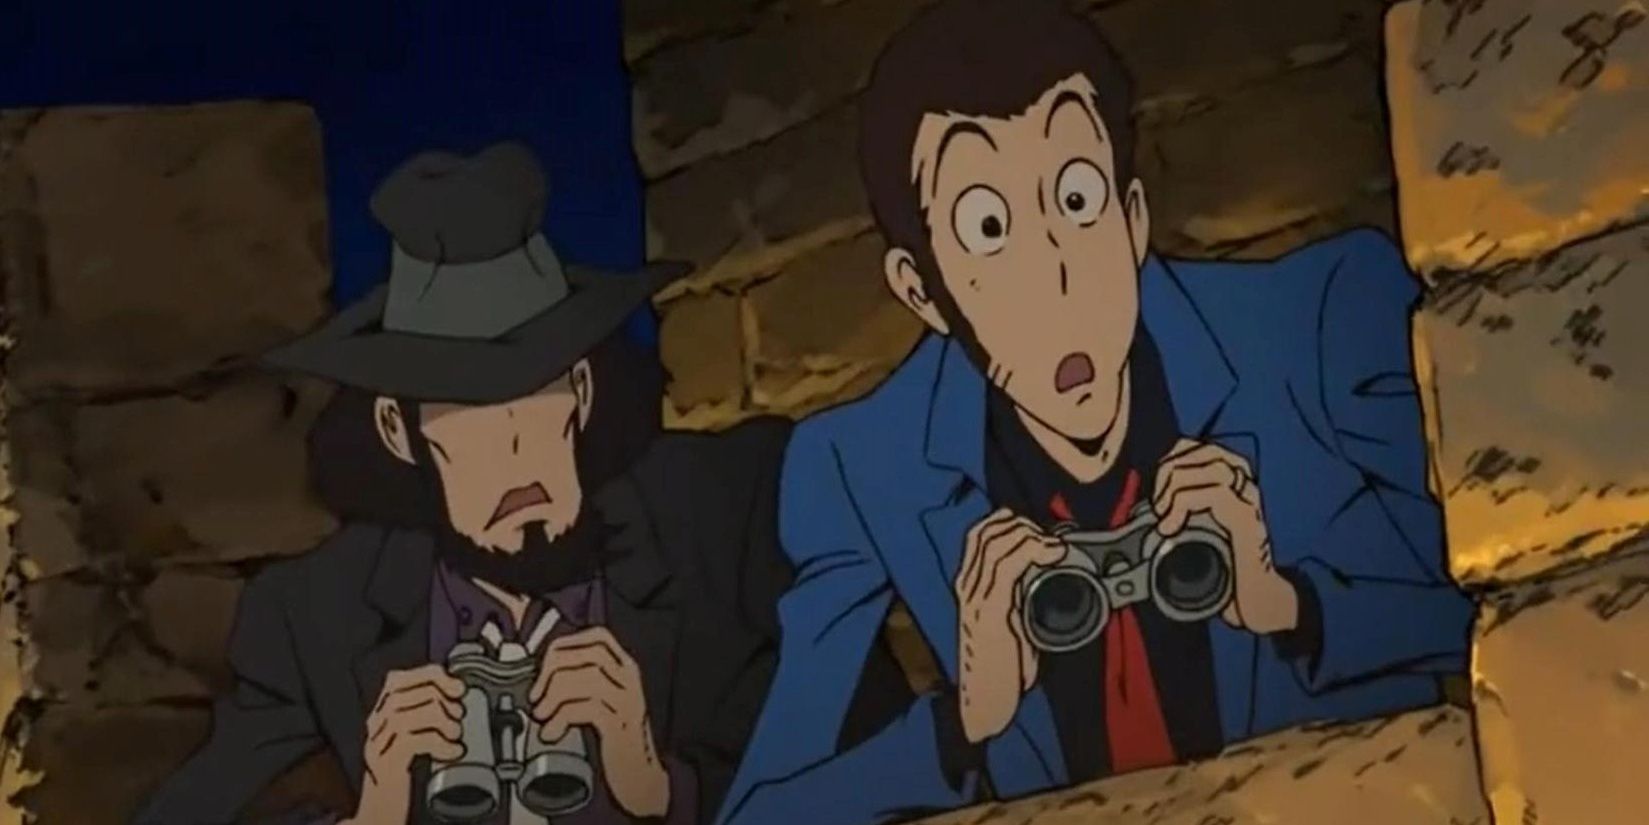 Lupin watches with binoculars in Lupin the Third Part IV